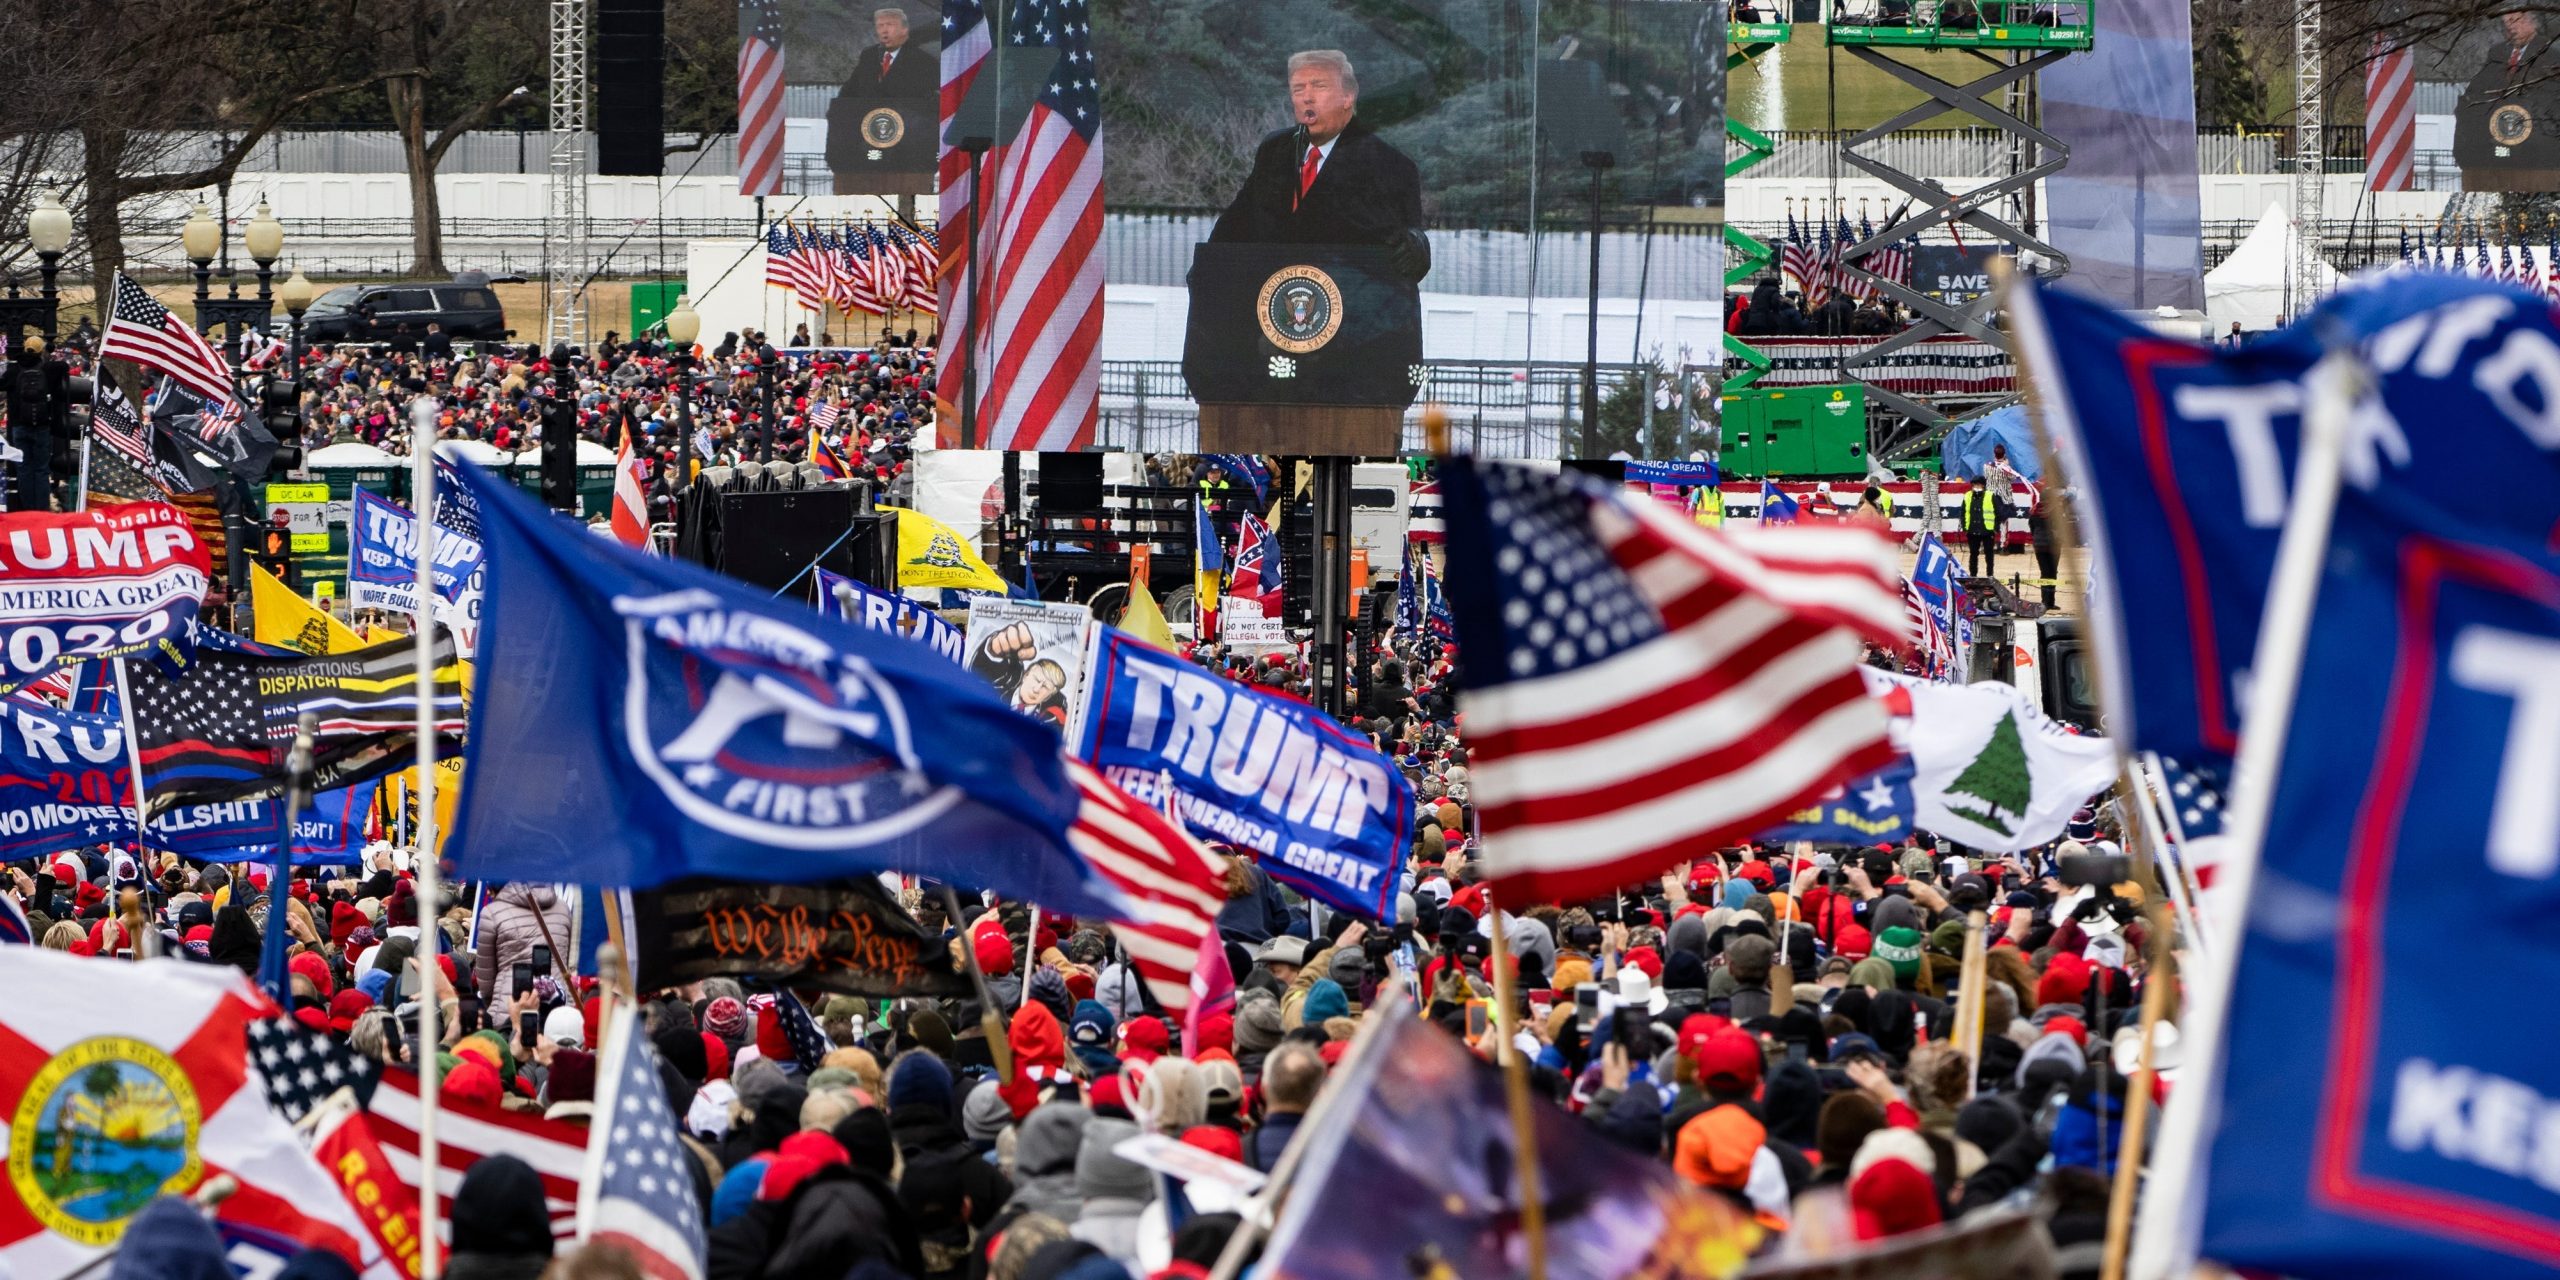 Donald Trump speaks at the "Save America Rally" on January 6, 2021